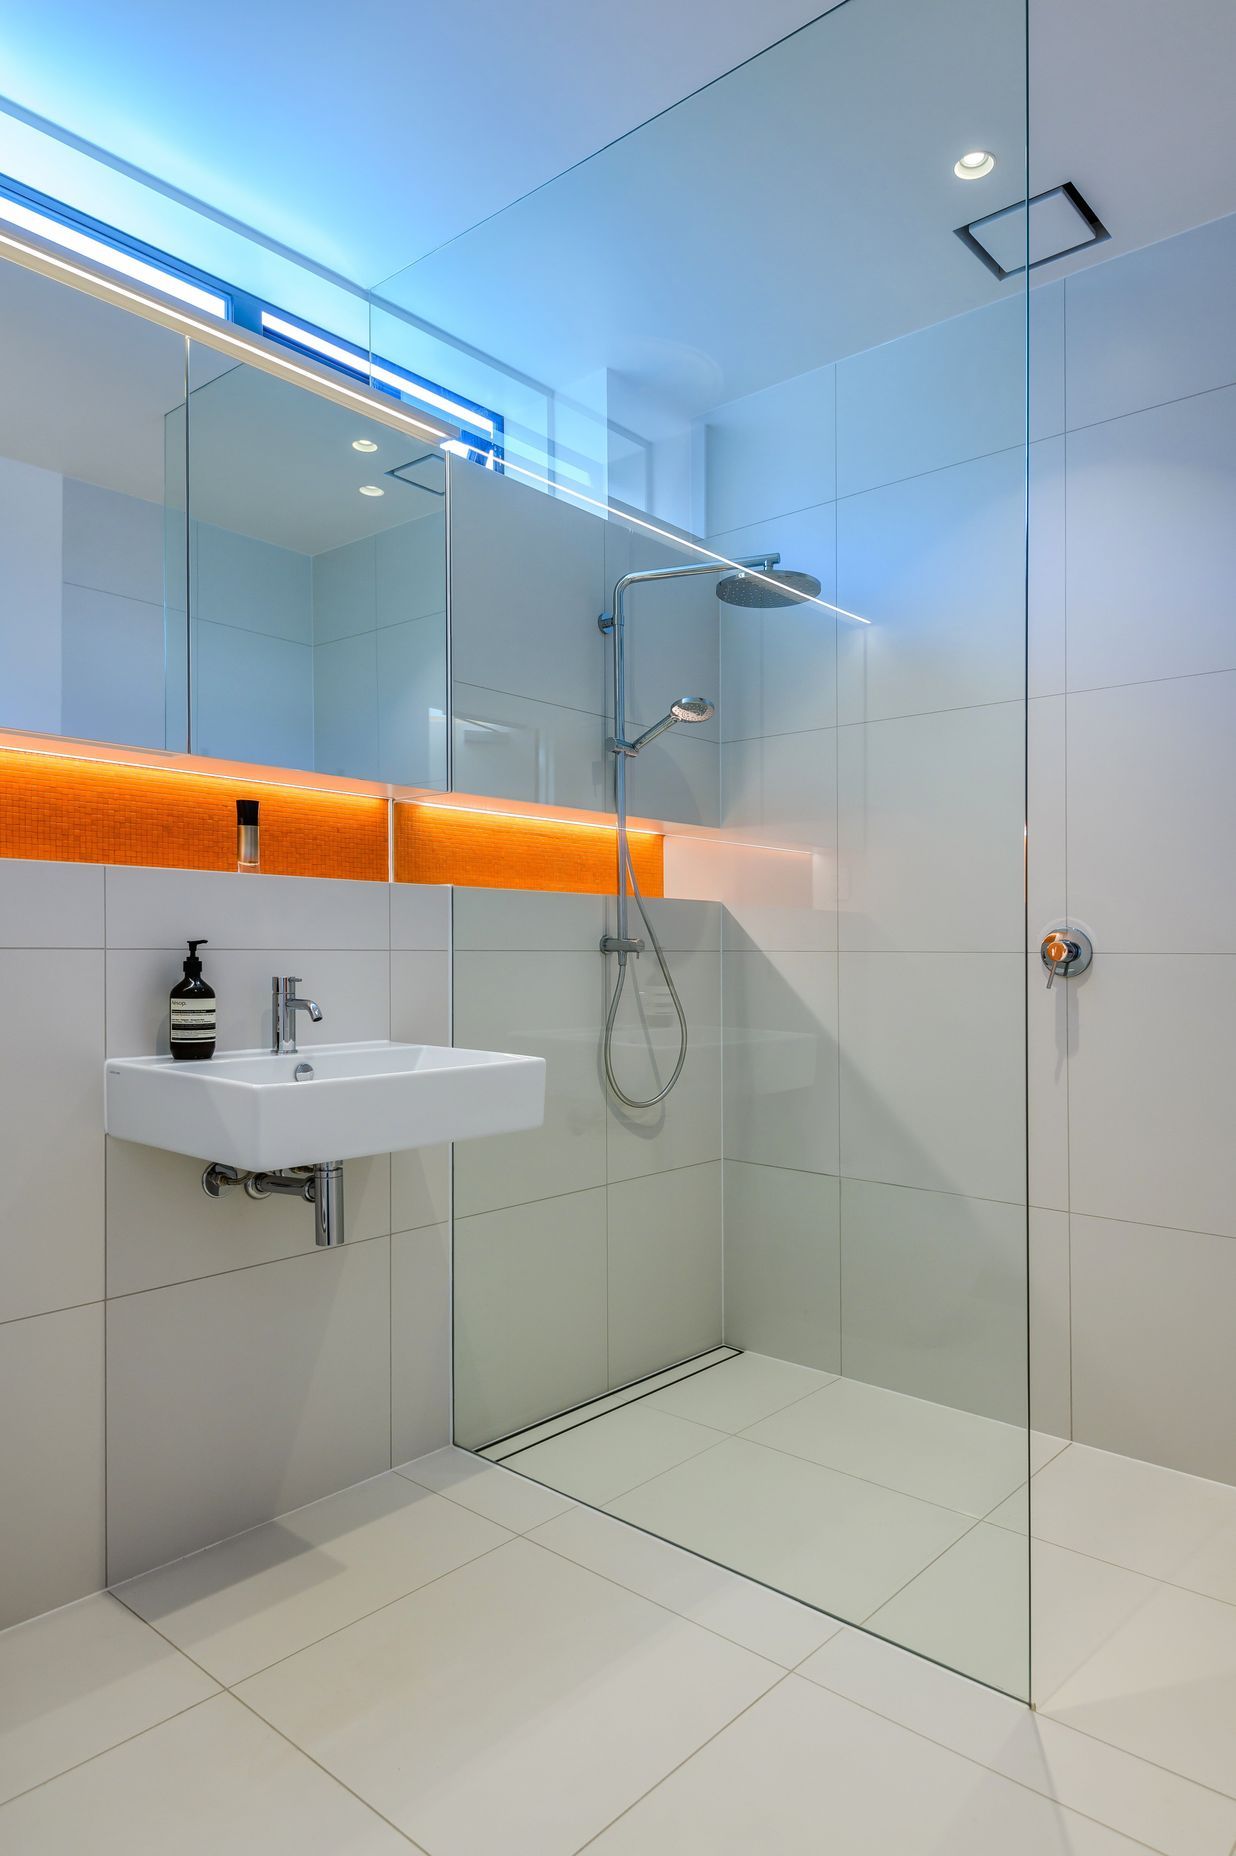 A pop of orange in the tiling and LED lighting elevate this otherwise all-white bathroom.